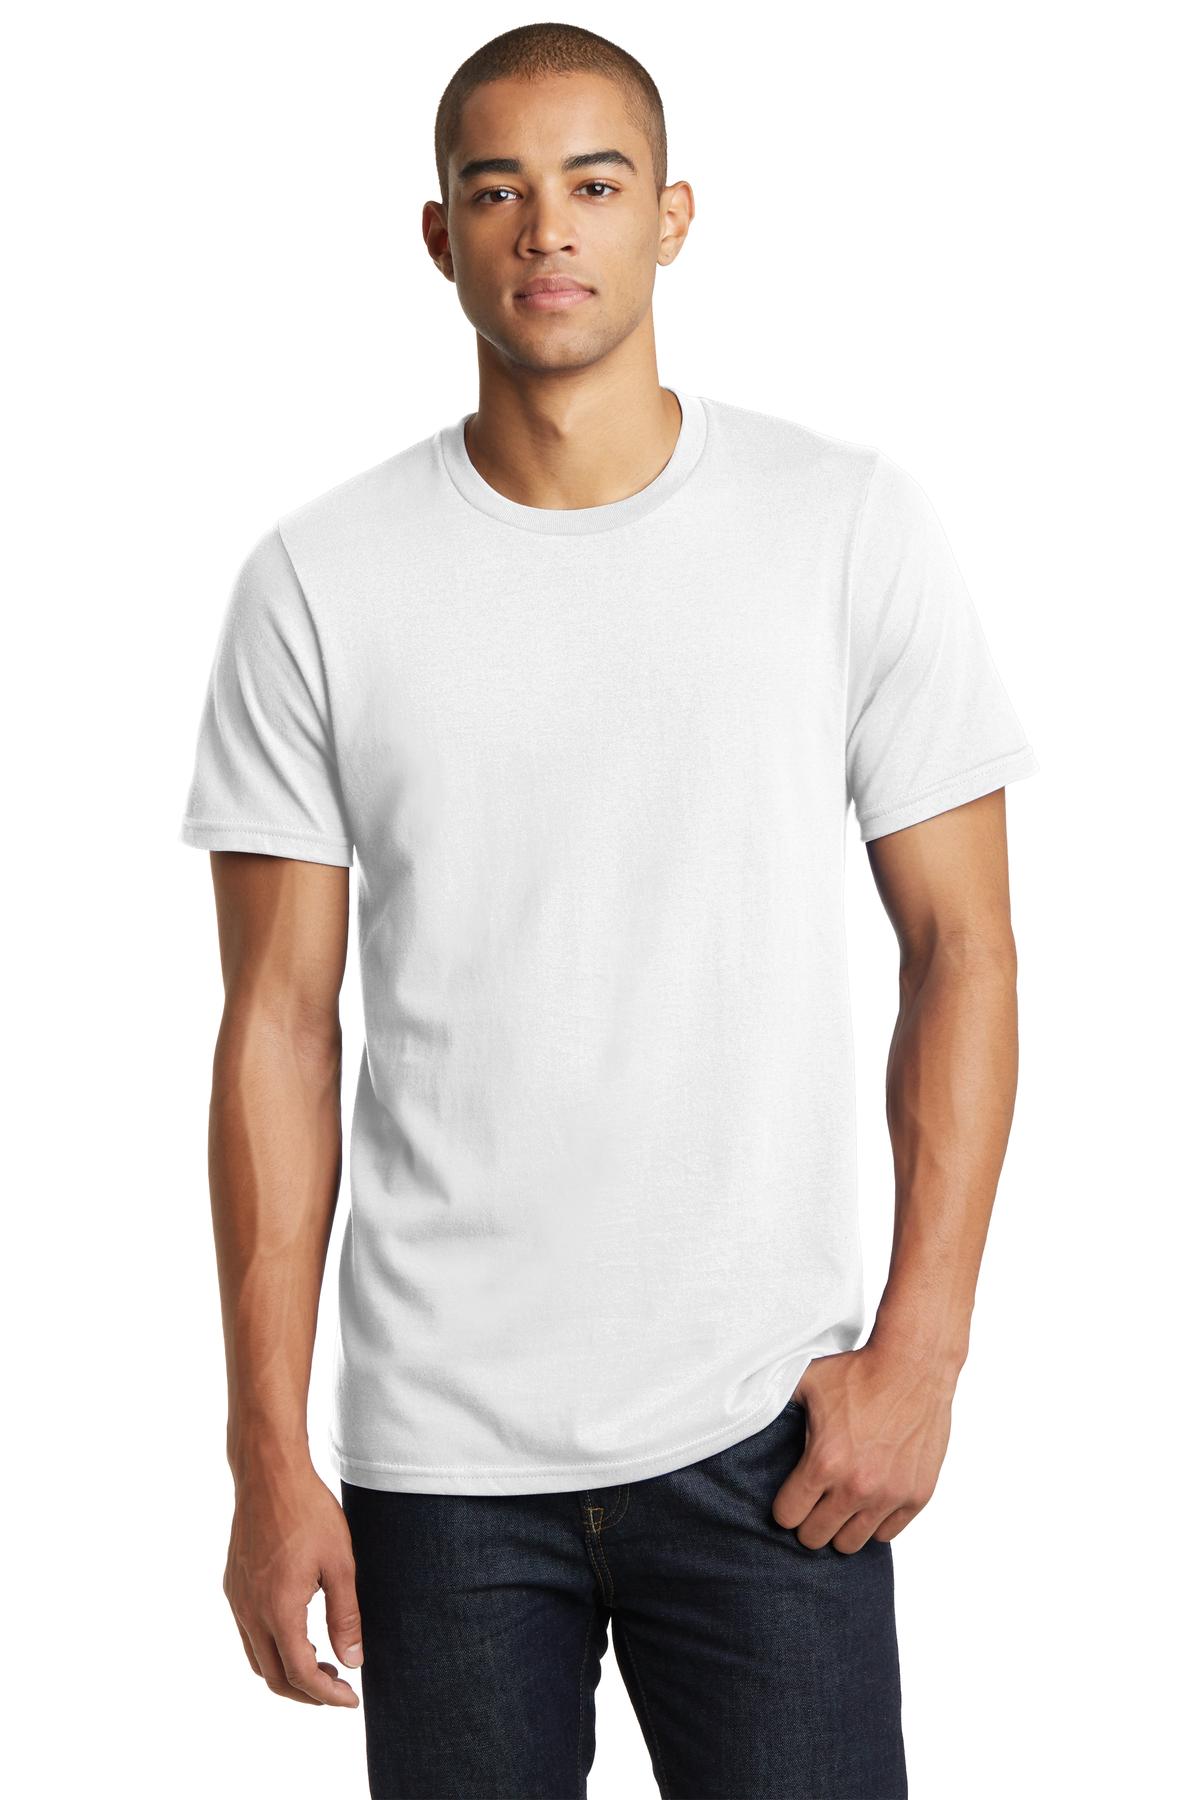 District DT7000 Young Mens T-Shirt 